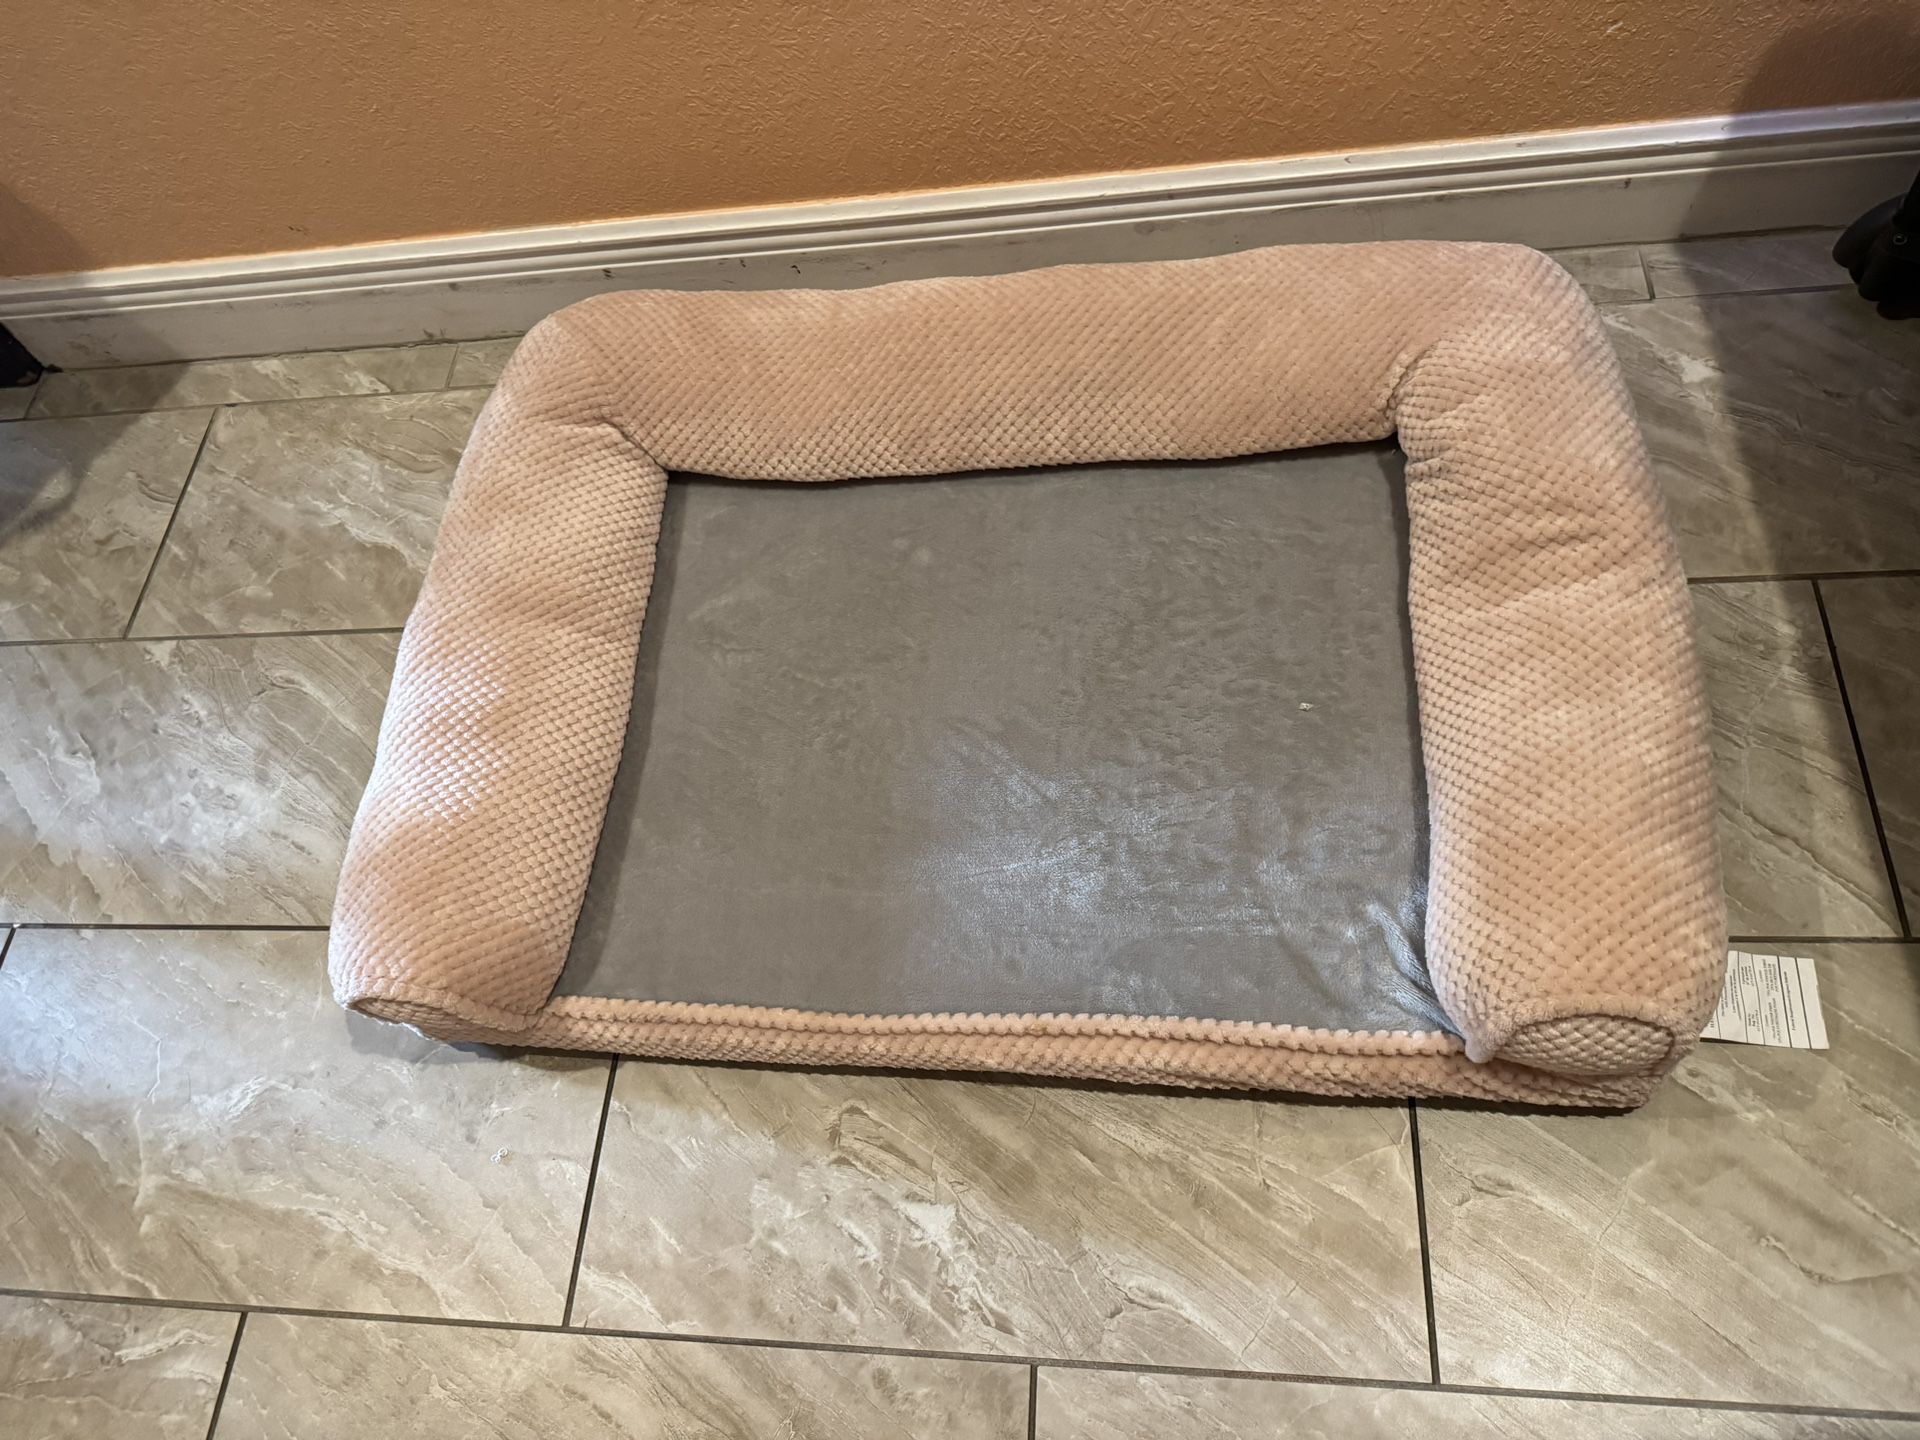 Pet Bed/Cats/Dogs